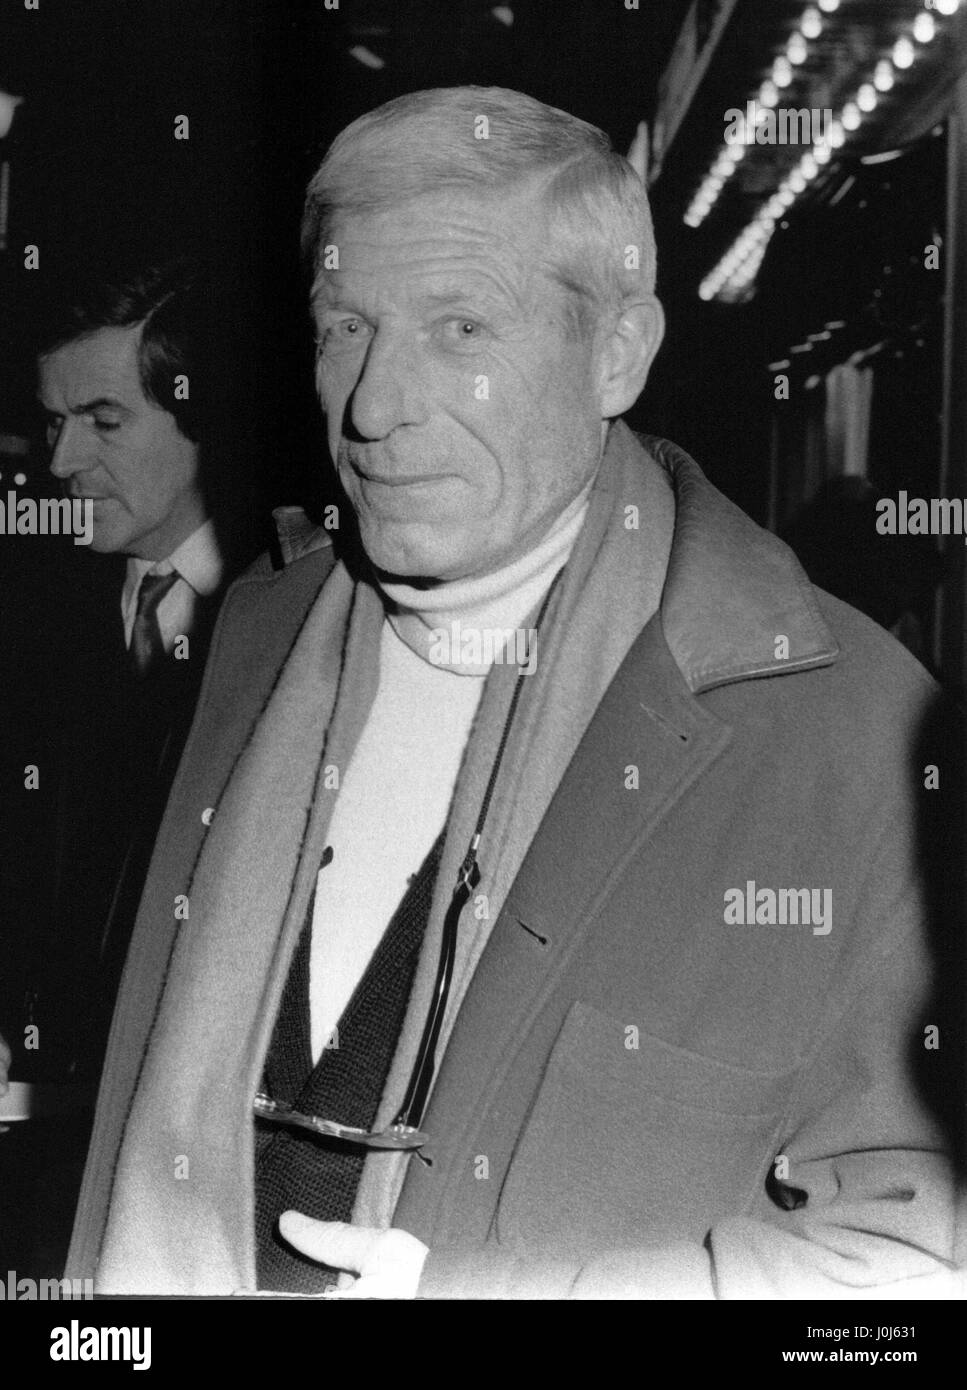 John Woodvine, British actor, attends a celebrity event in London, England on November 27, 1989. Stock Photo